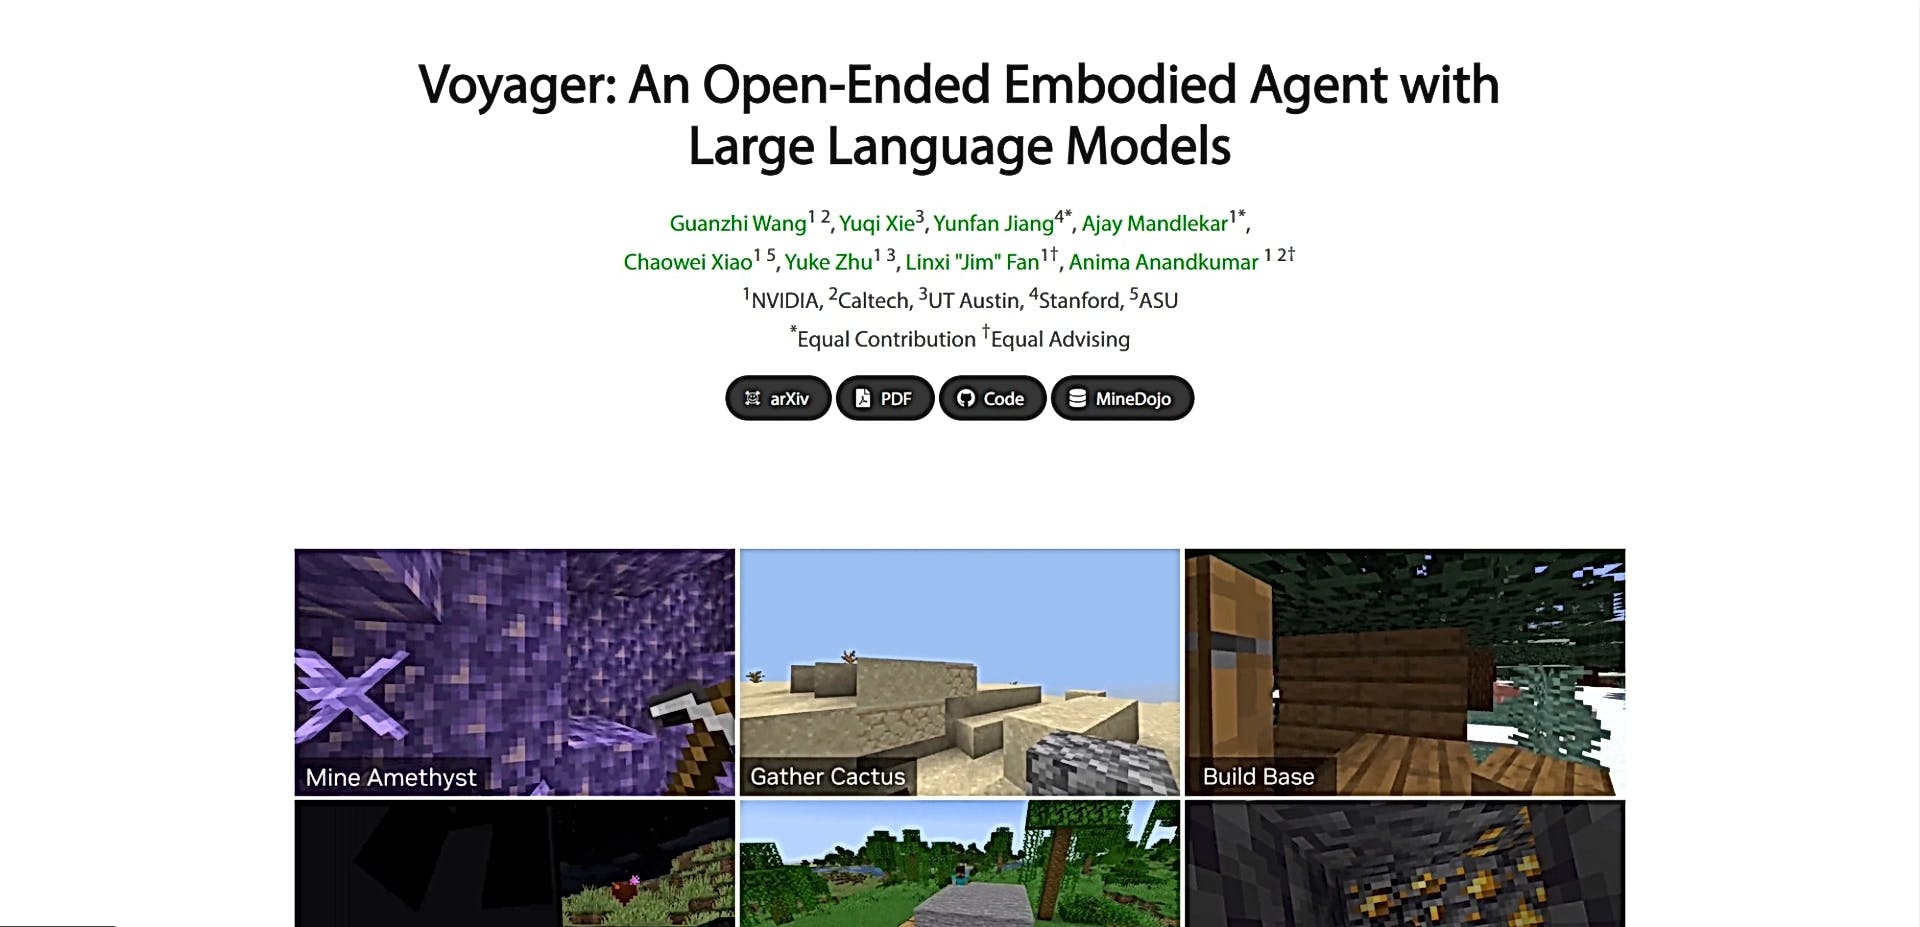 Voyager featured